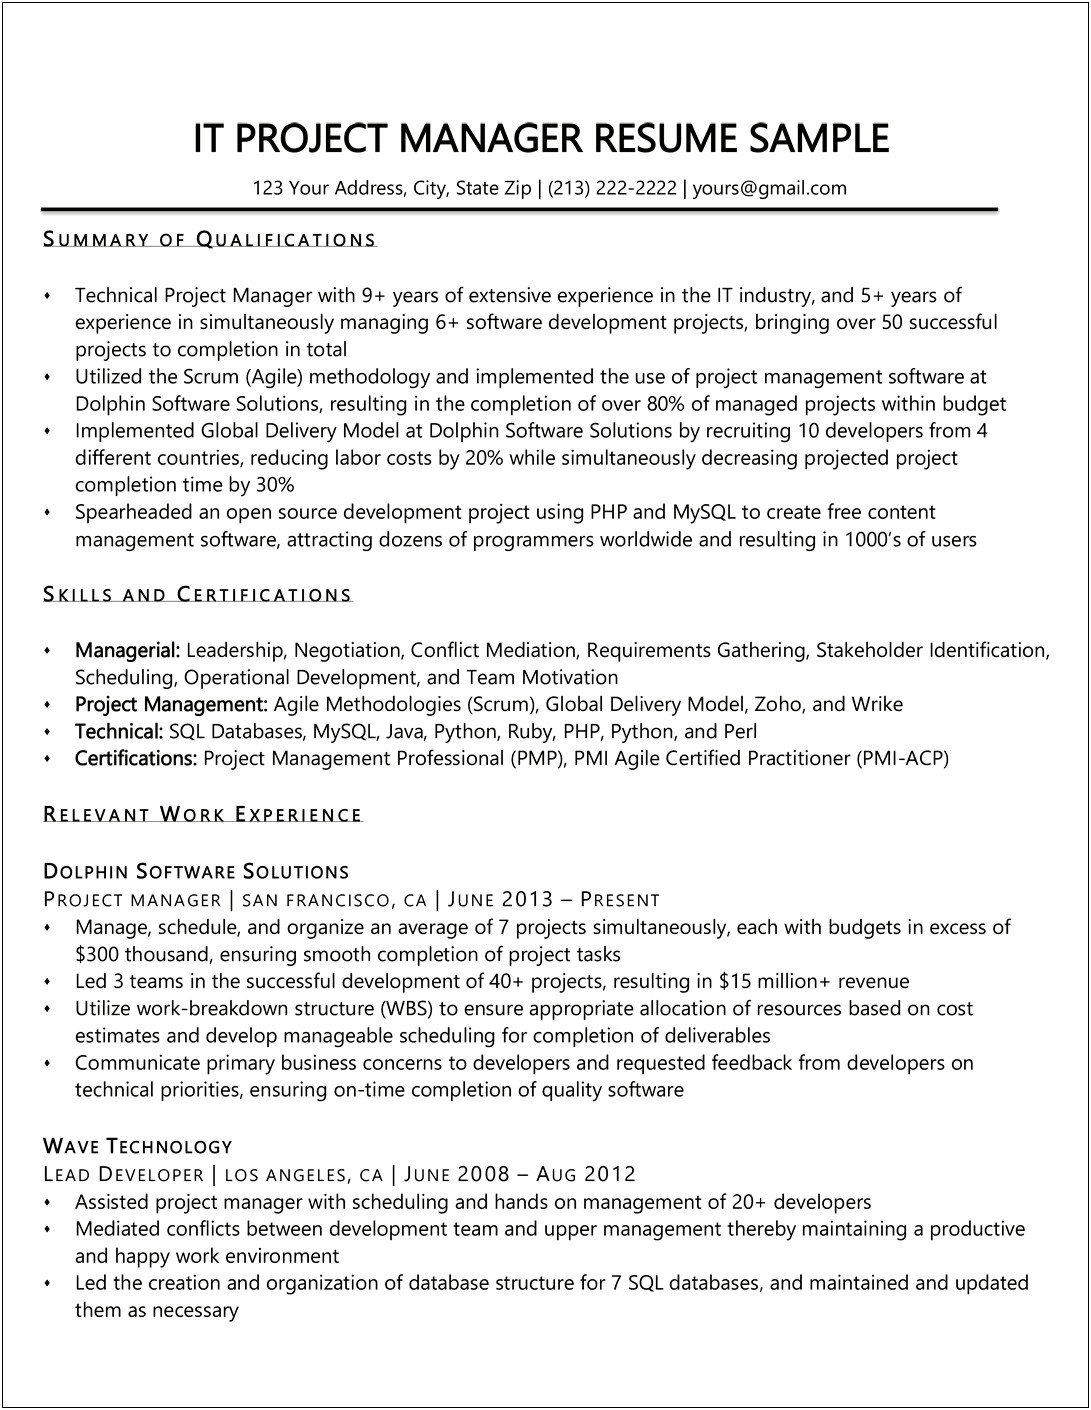 Resume Summary Examples Information Technology